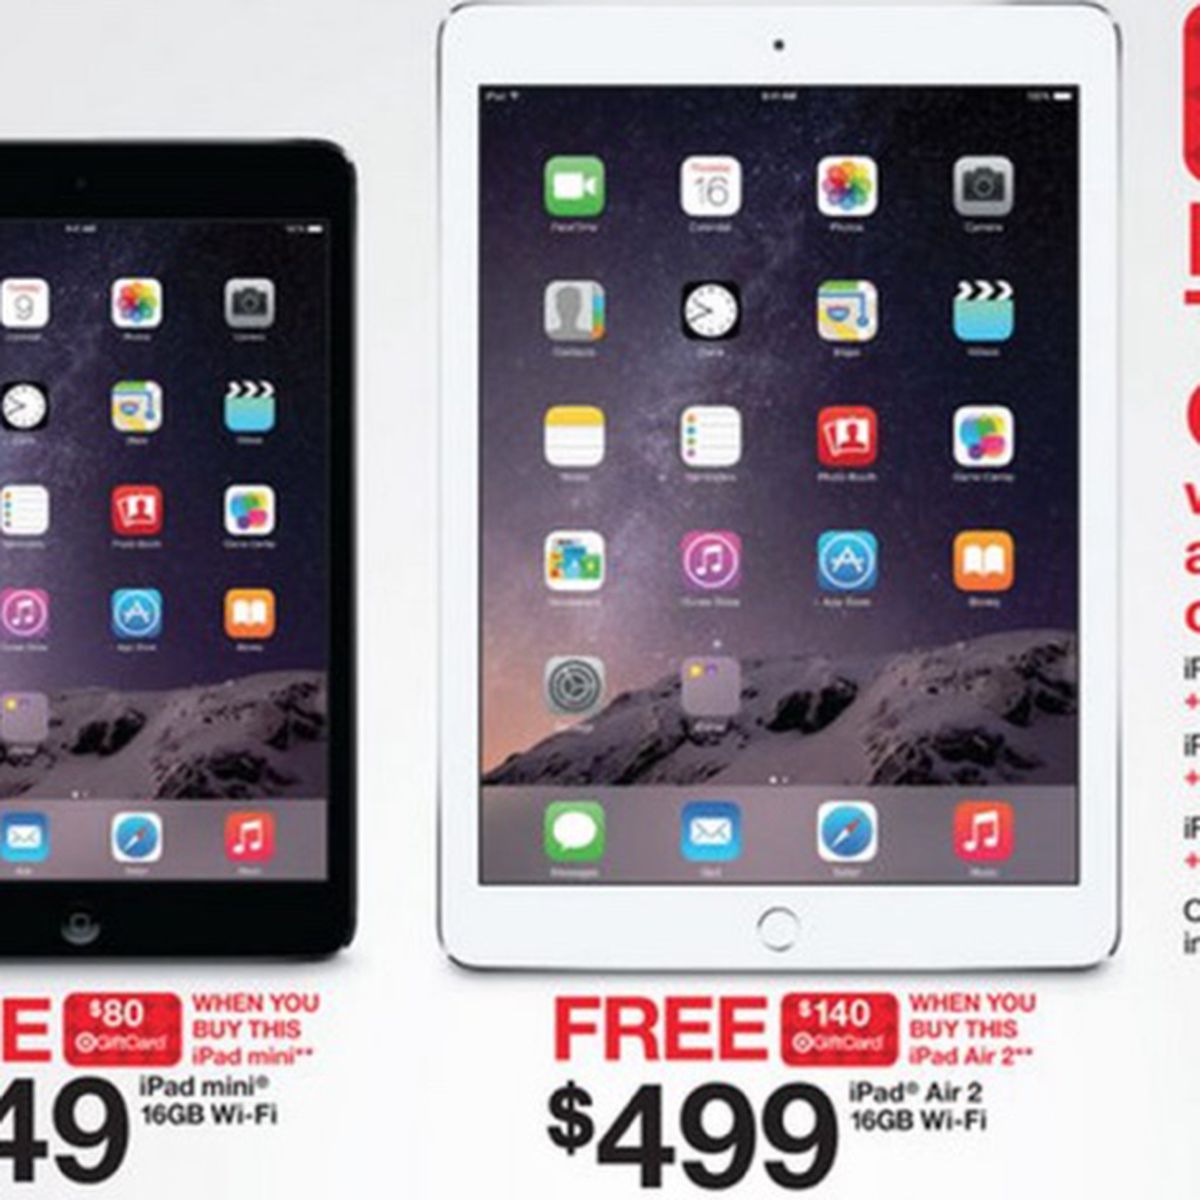 Target Offering Gift Cards Up To 140 With Ipad Iphone Purchase On Black Friday Macrumors